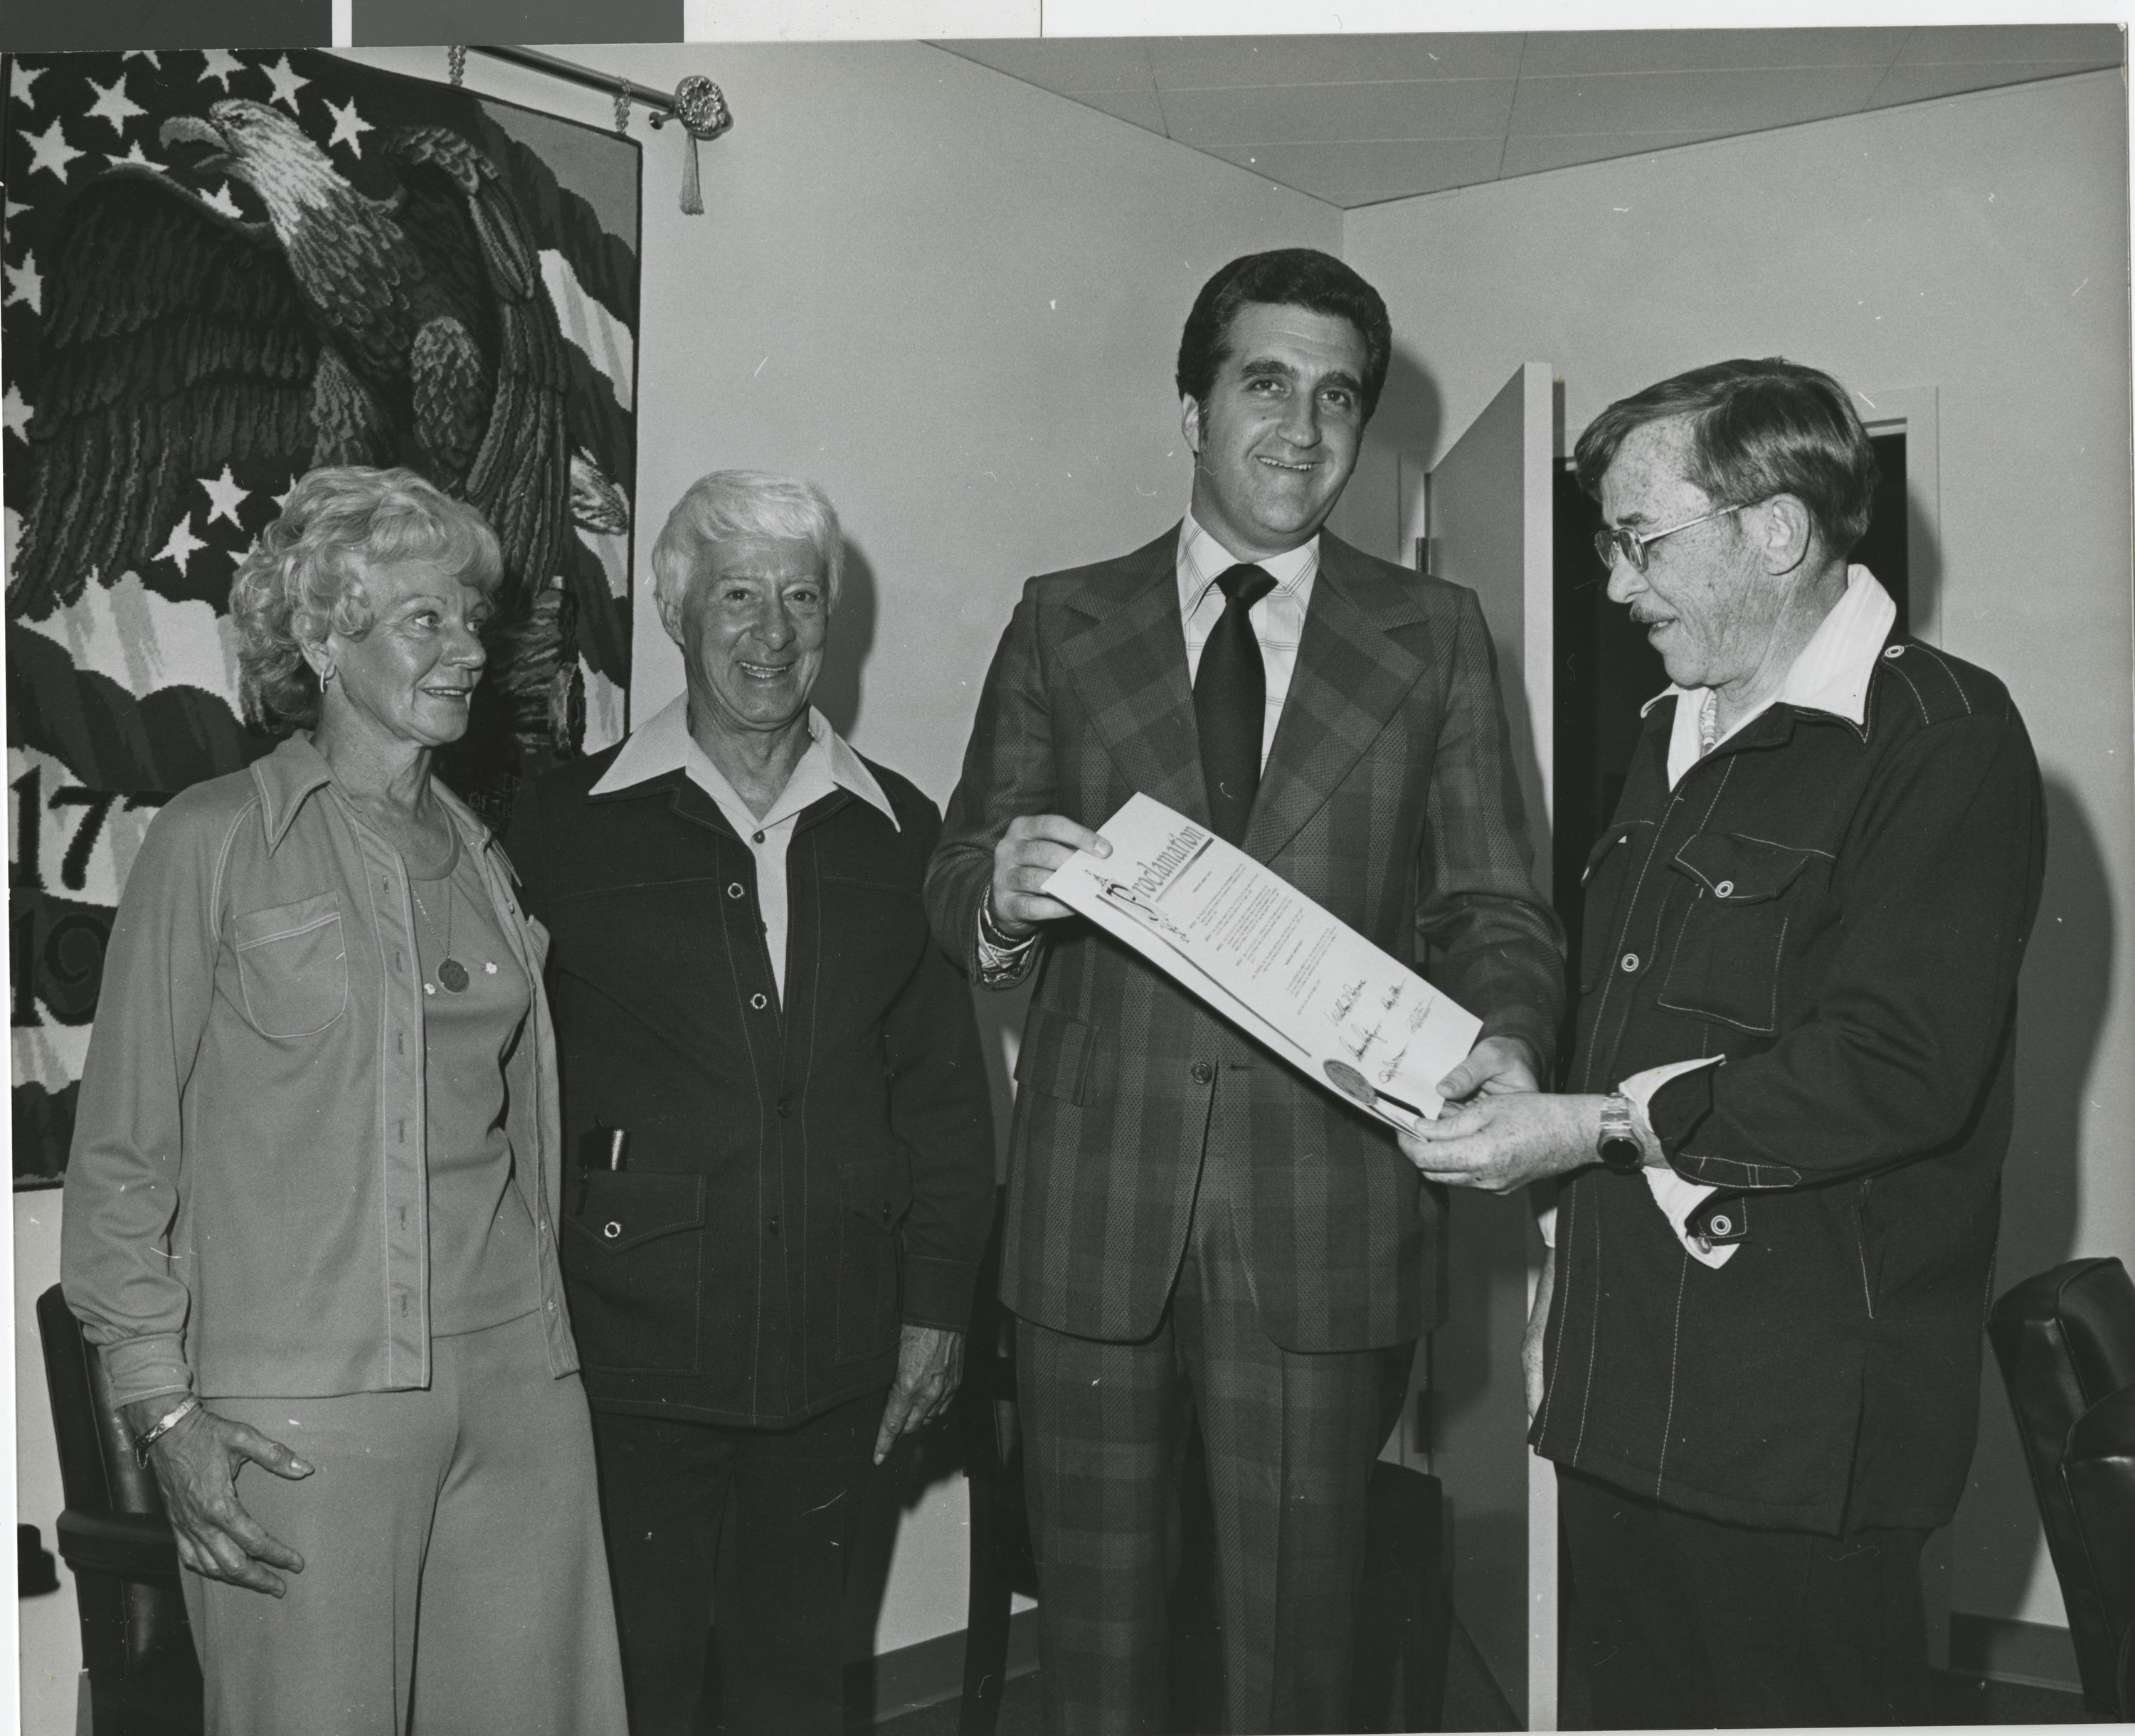 Photograph of Ron Lurie presenting a proclamation to a group